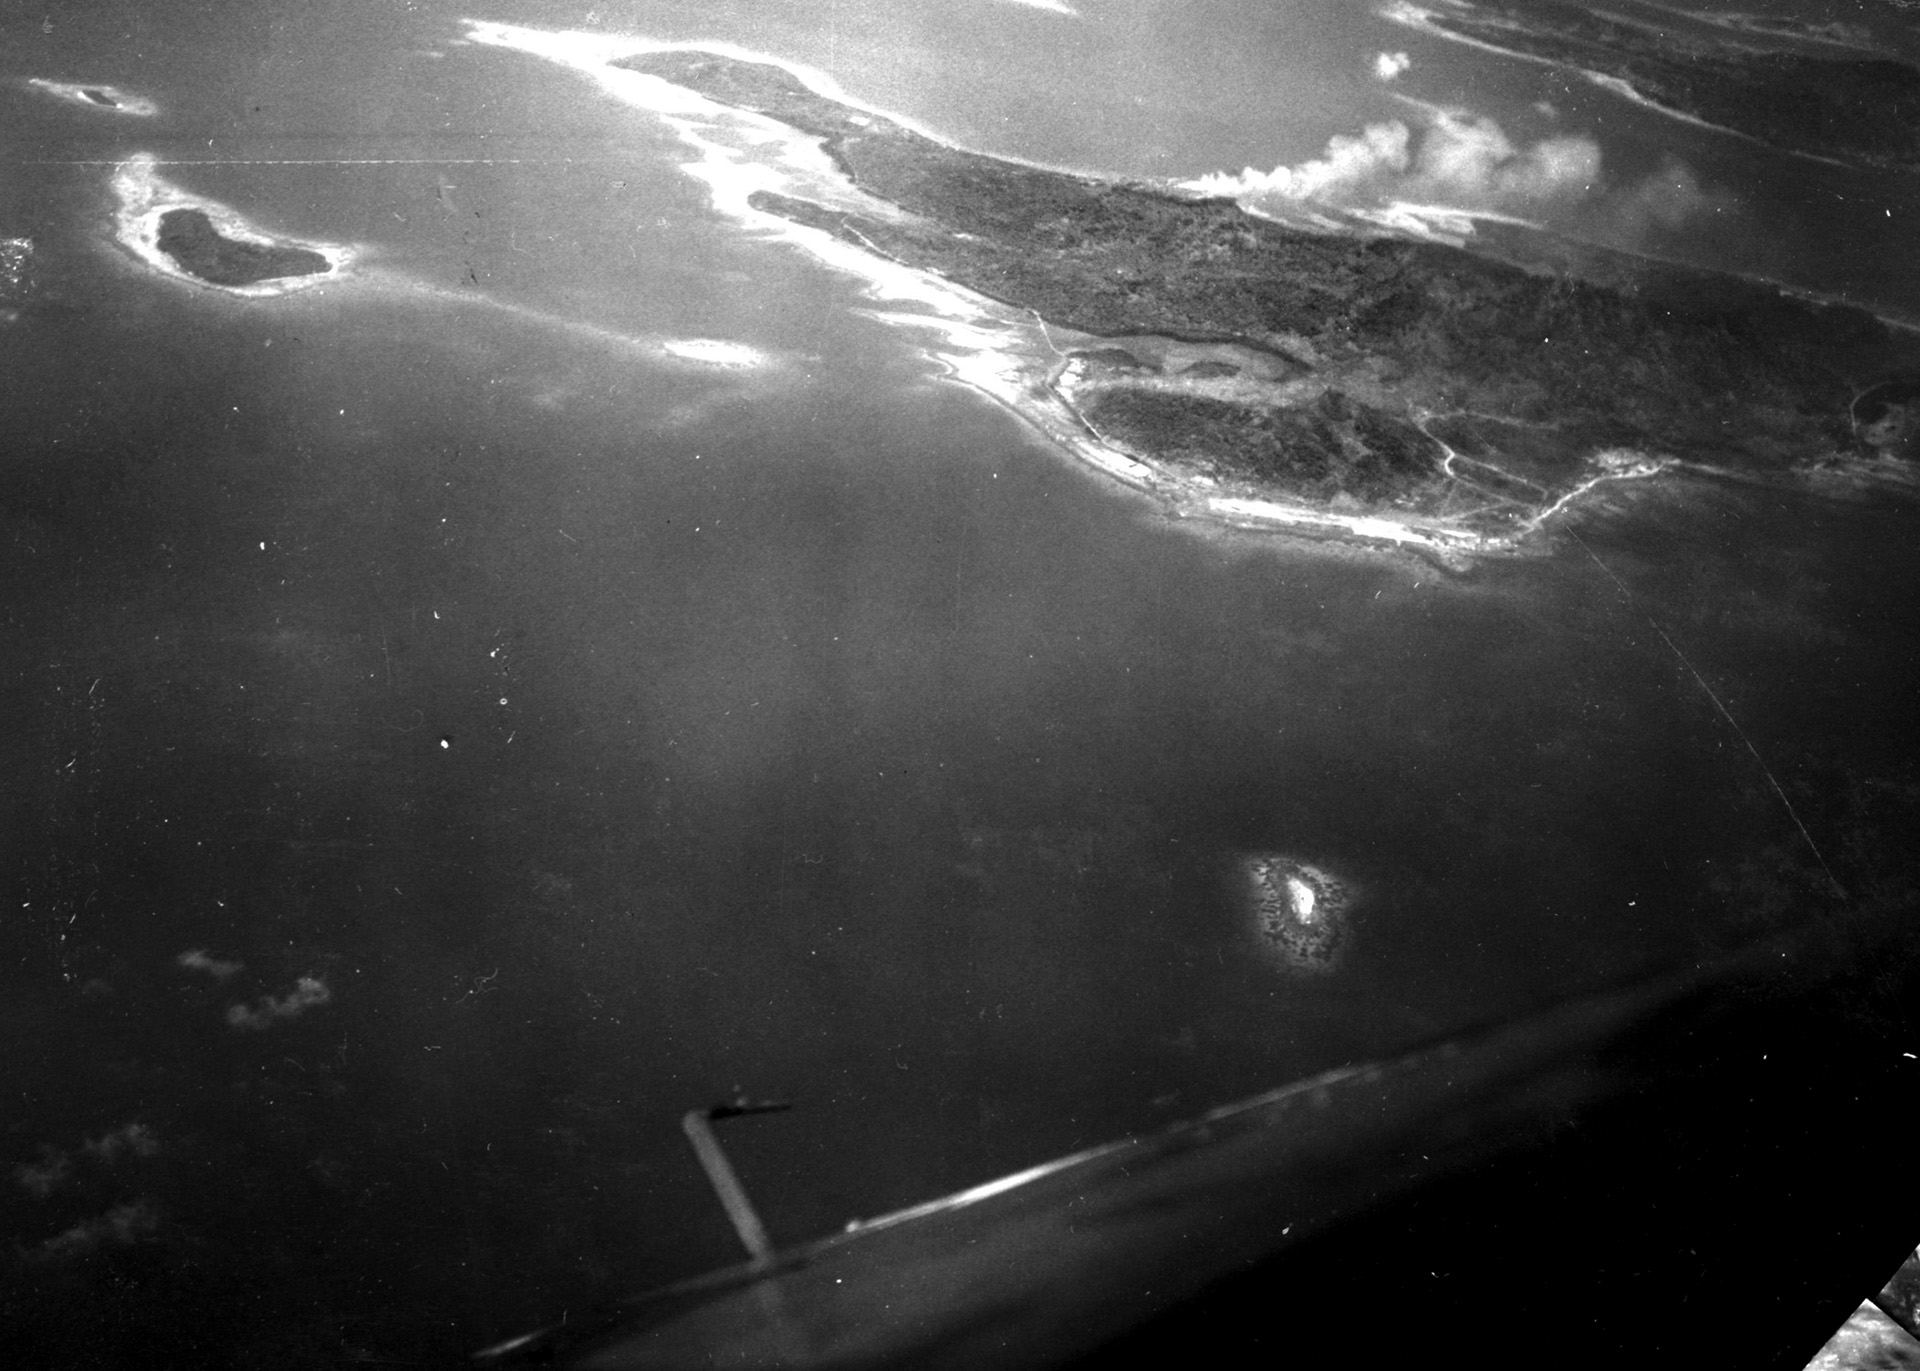 Moen Island, one of many spits of land that comprise Truk Atoll, is seen in this photograph taken at the end of April 1944 by a photo reconnaissance plane of Air Group 32. The Japanese airfield on Moen is visible as the white area along the water’s edge. 